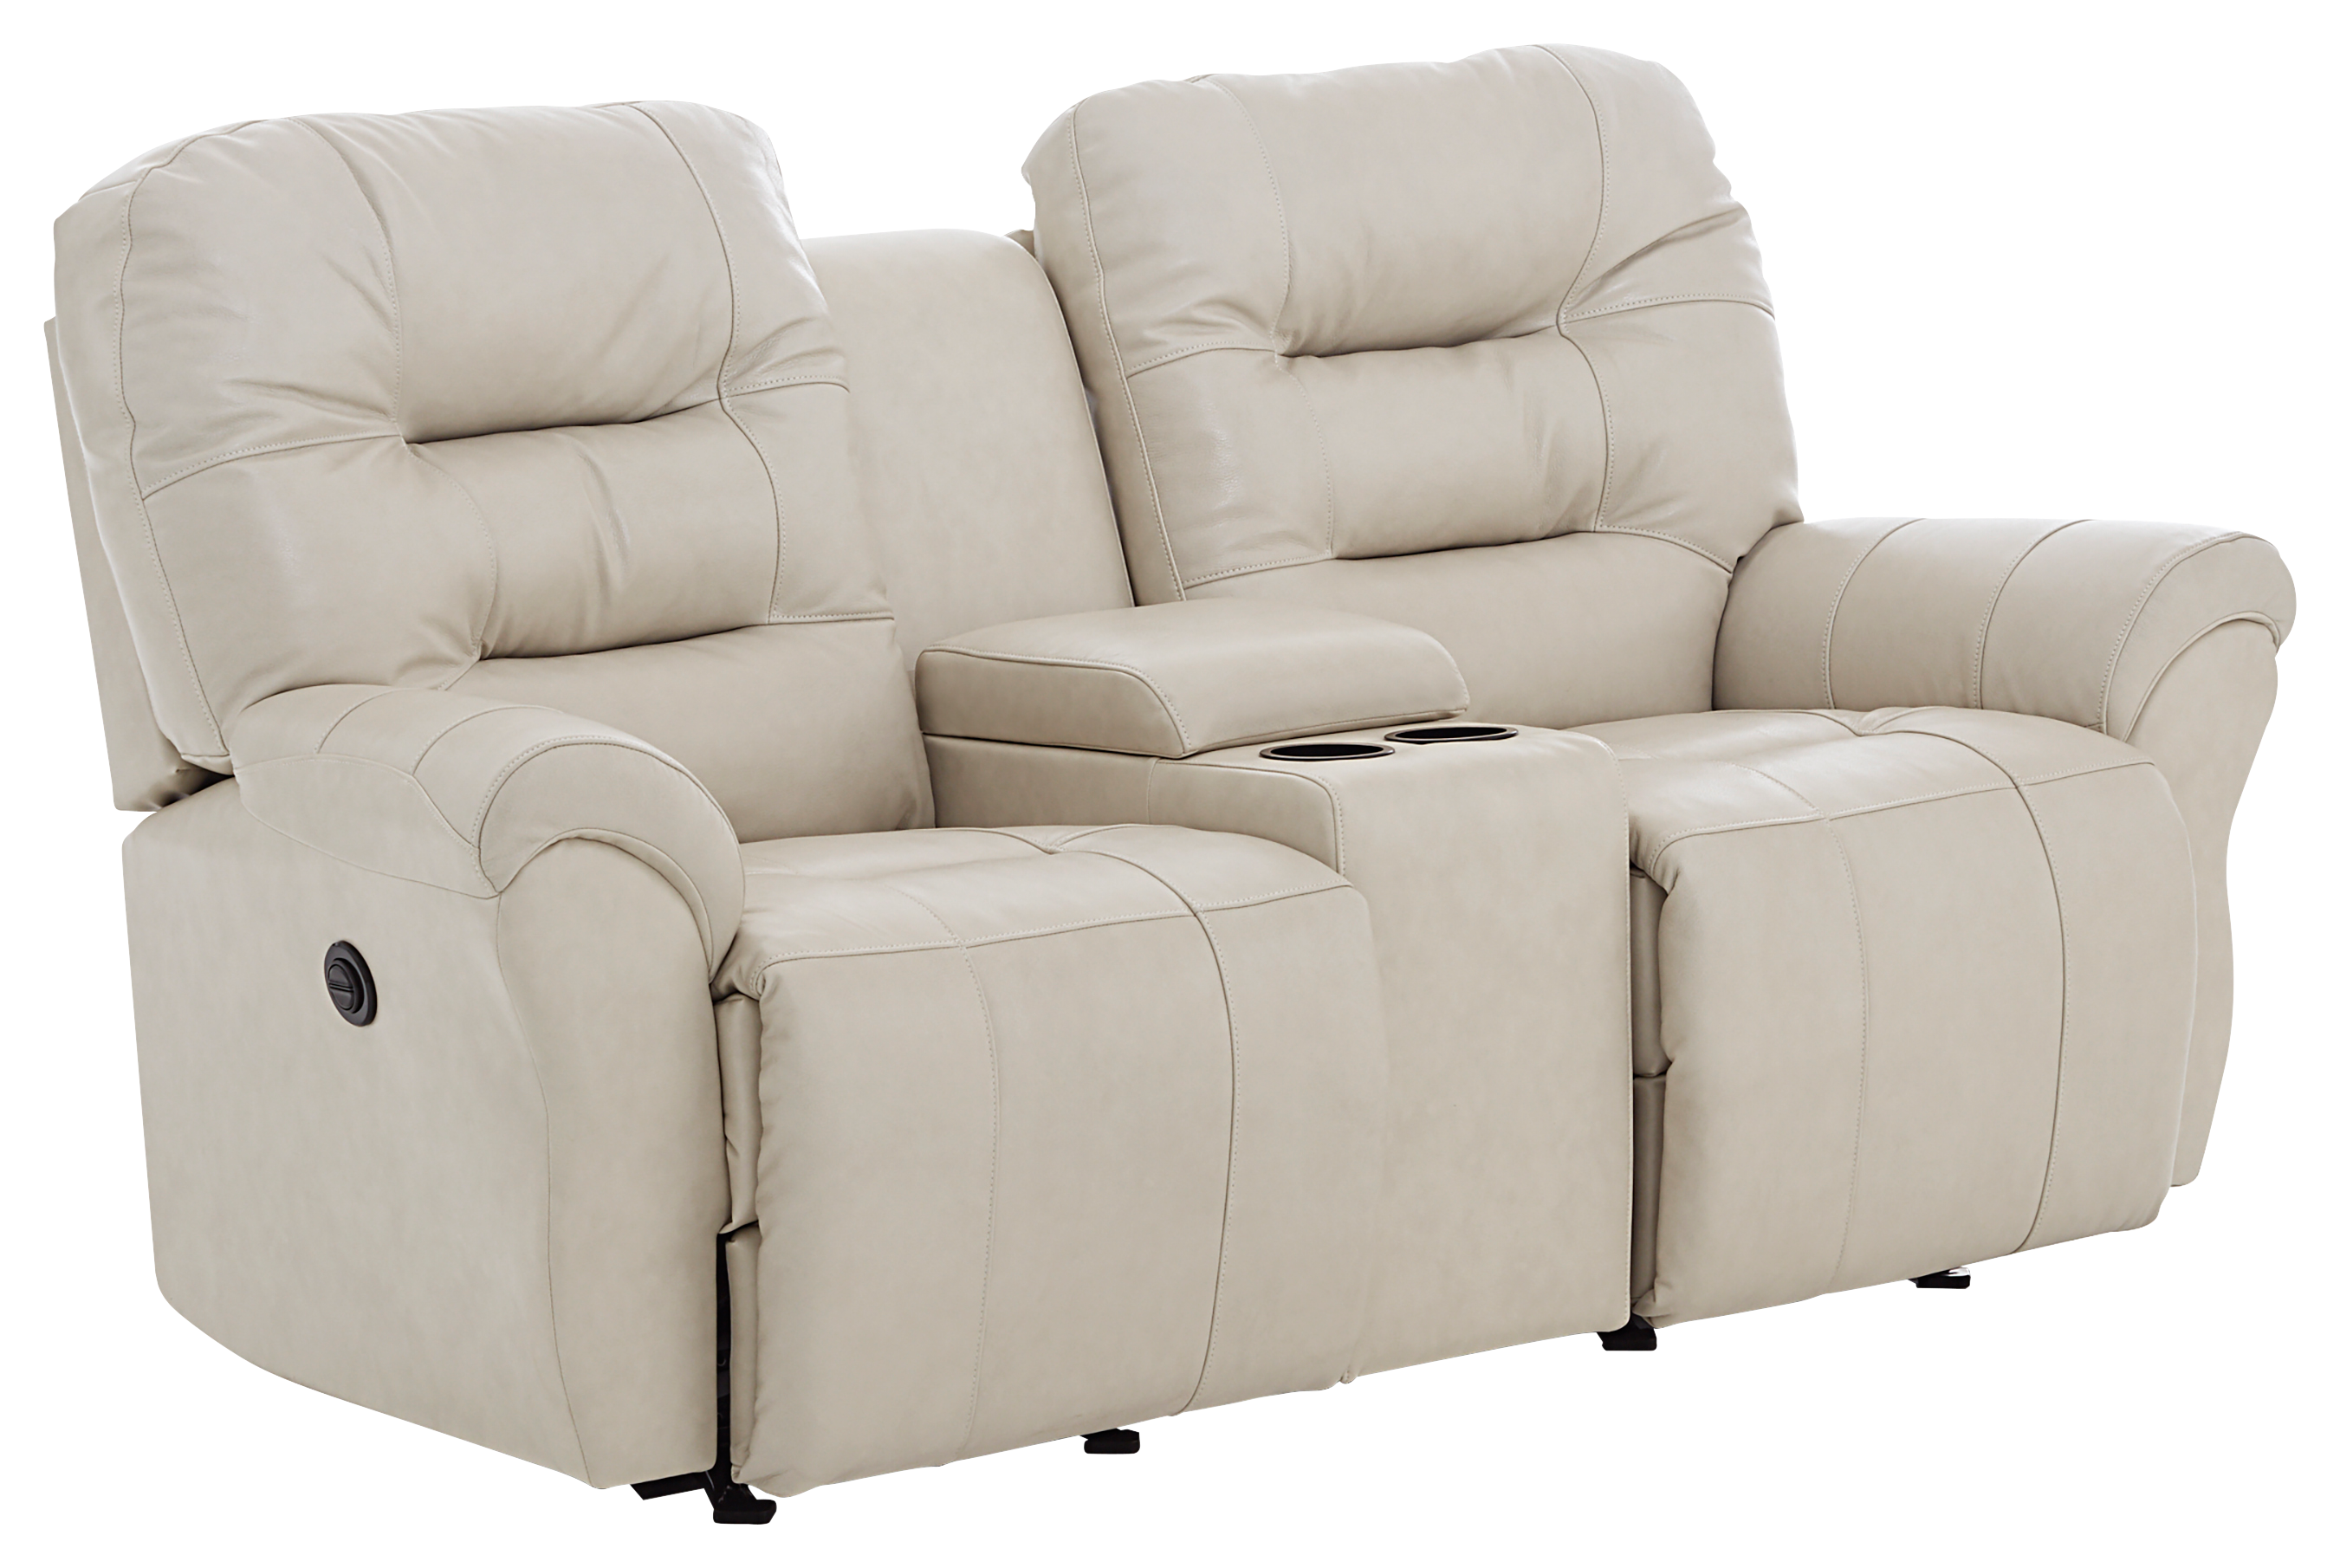 Best Home Furnishings Unity Furniture Collection Power Space Saver Love Seat with Console - Sand